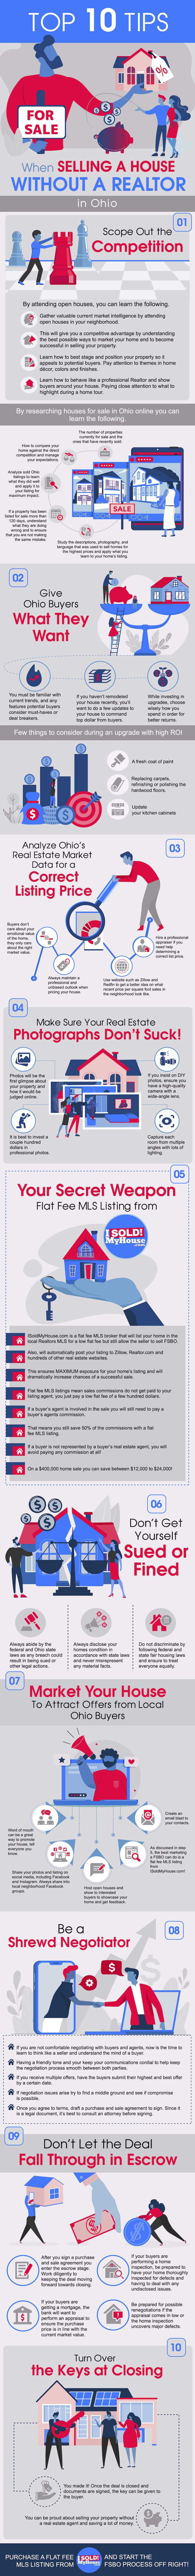 infographic of the 10 steps to sell a house in ohio without an agent